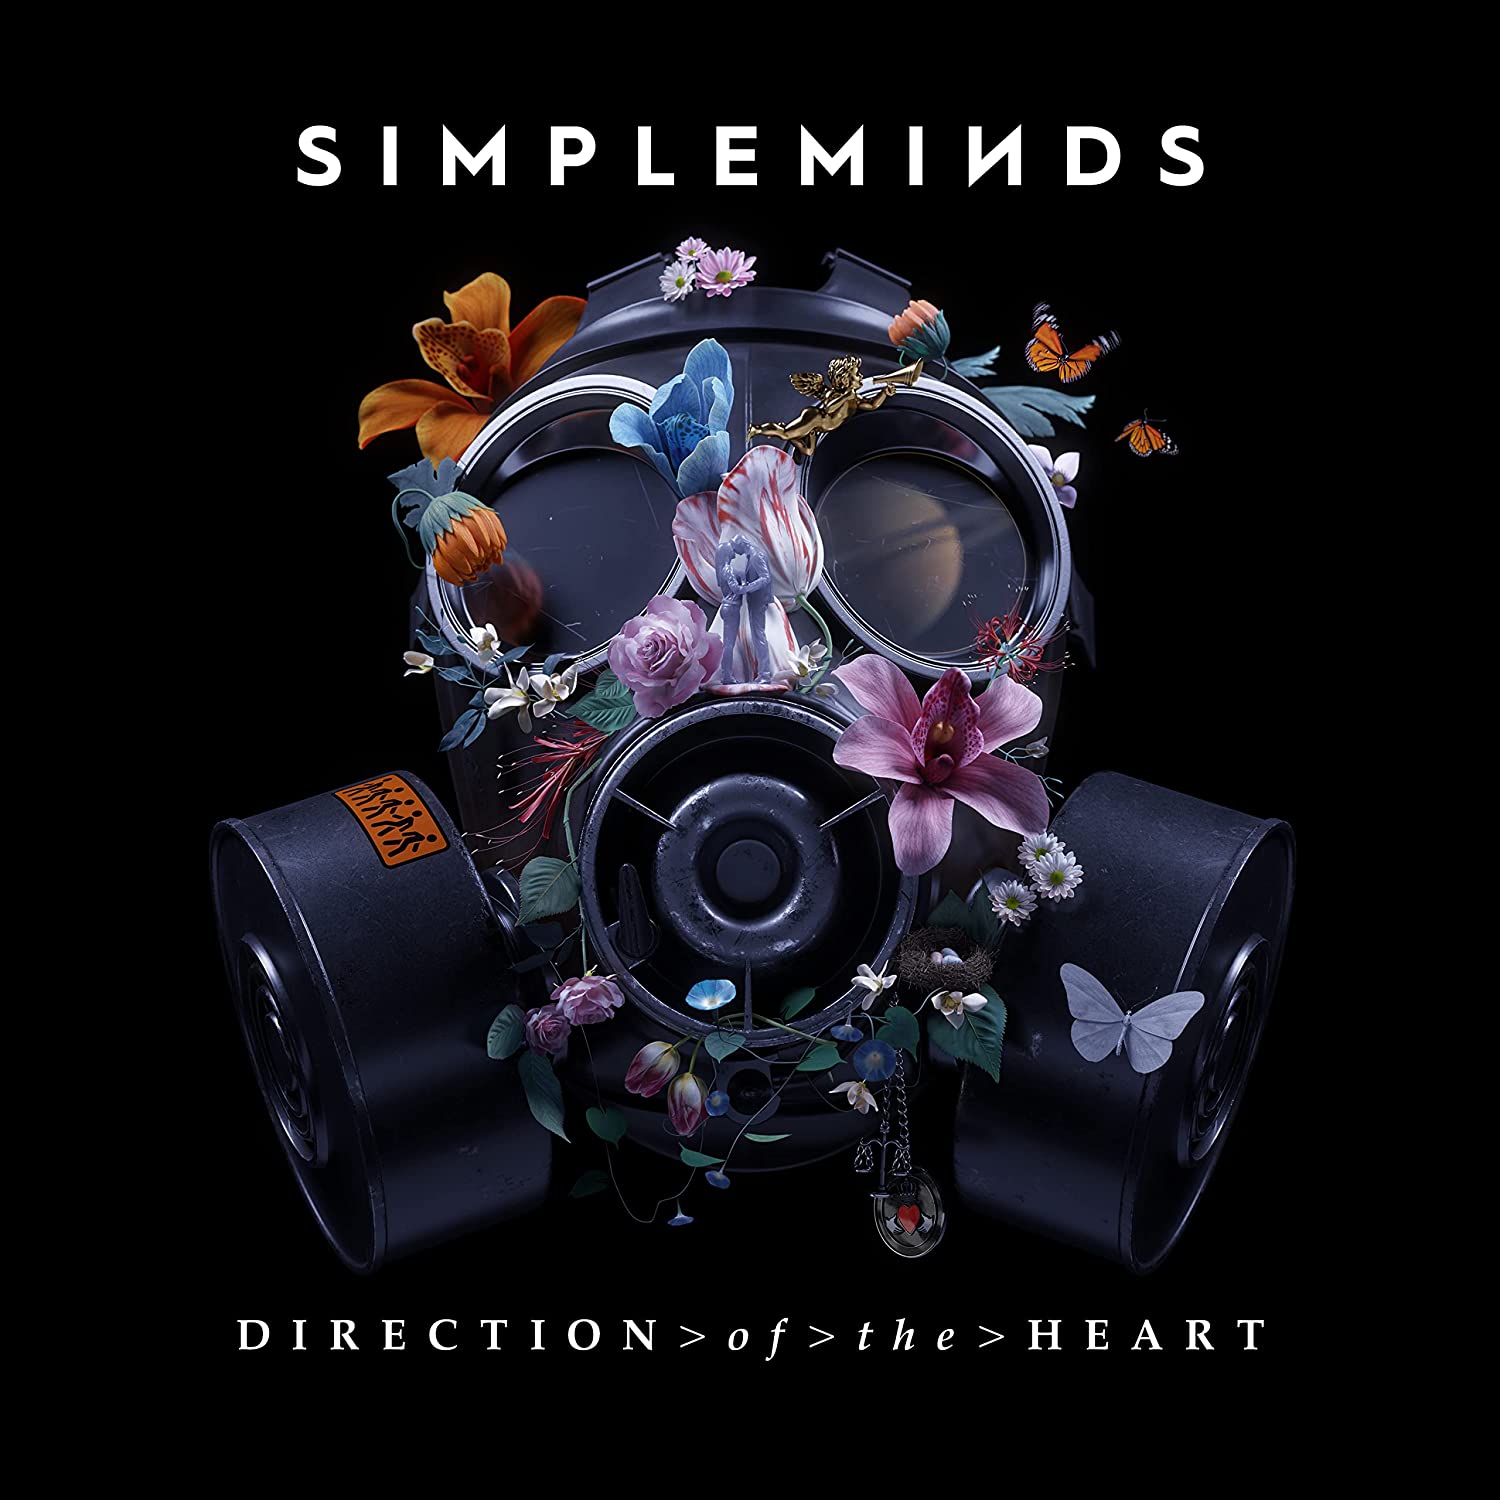 Simple Minds - Direction of the Heart (Vinyl LP)